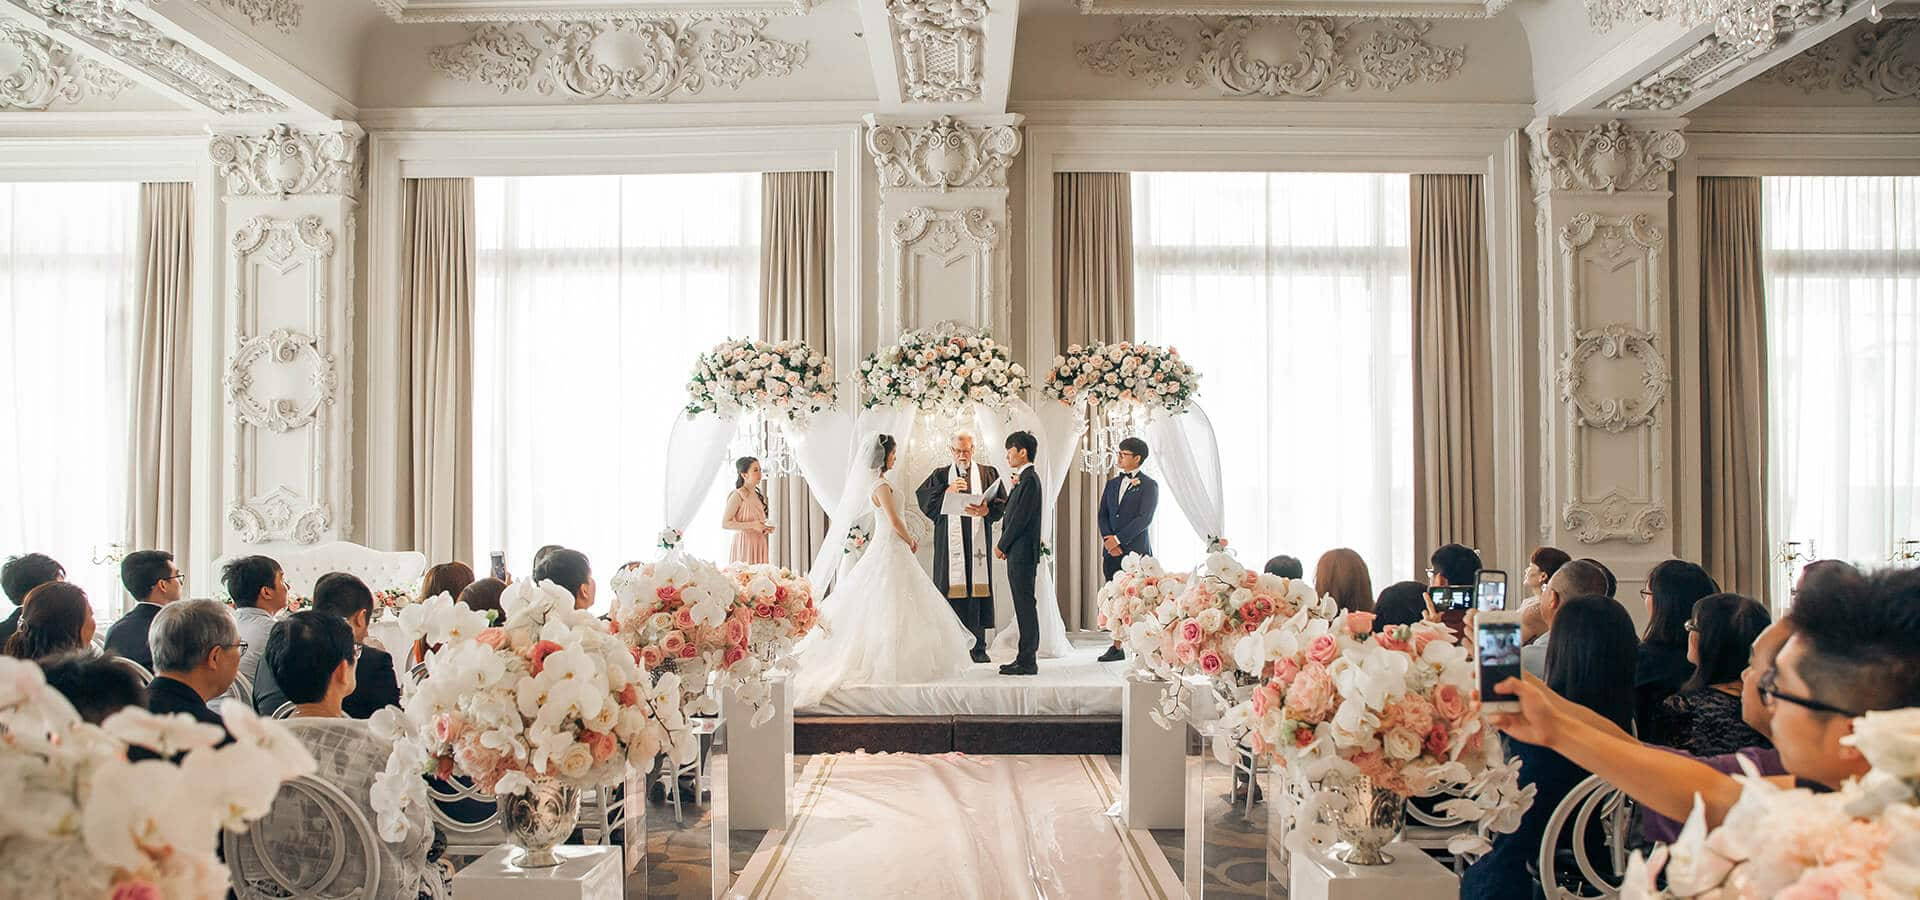 Hero image for How To Write Heartfelt Vows: Tips From Toronto’s Top Wedding Officiants